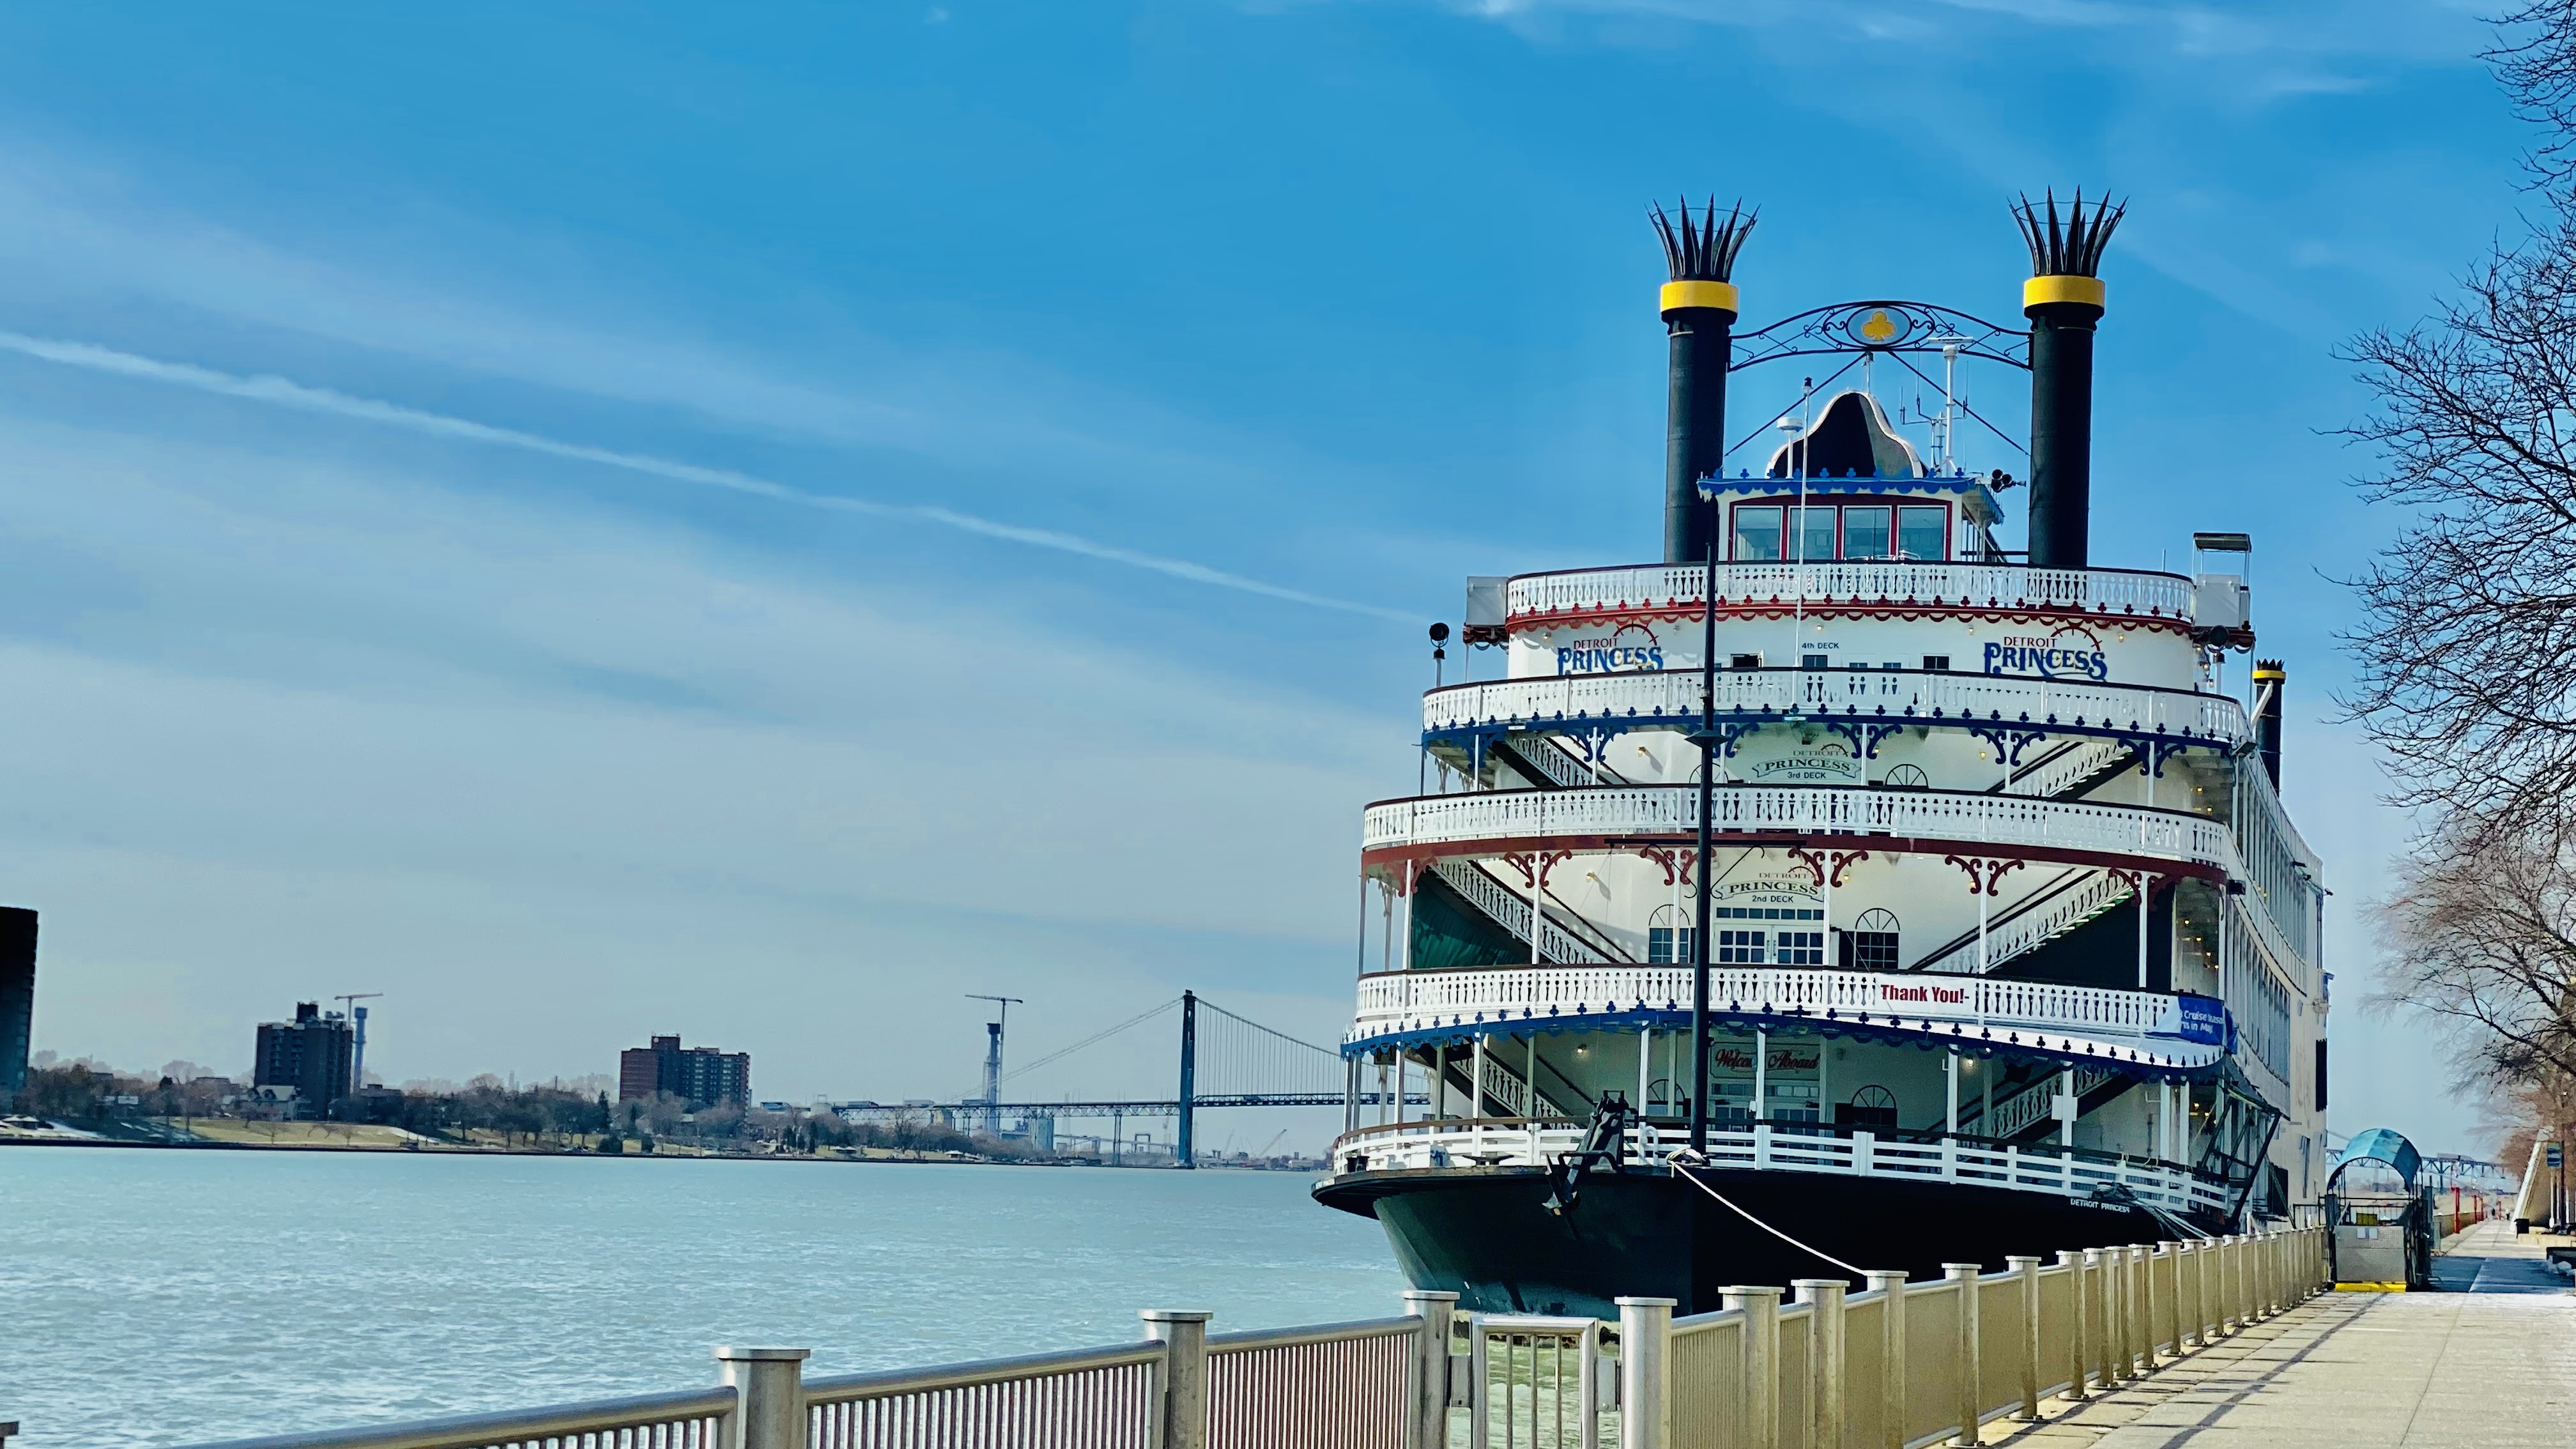 The Detroit Princess Riverboat can be spotted along the trail. Photo by Zynab Al-Timimi